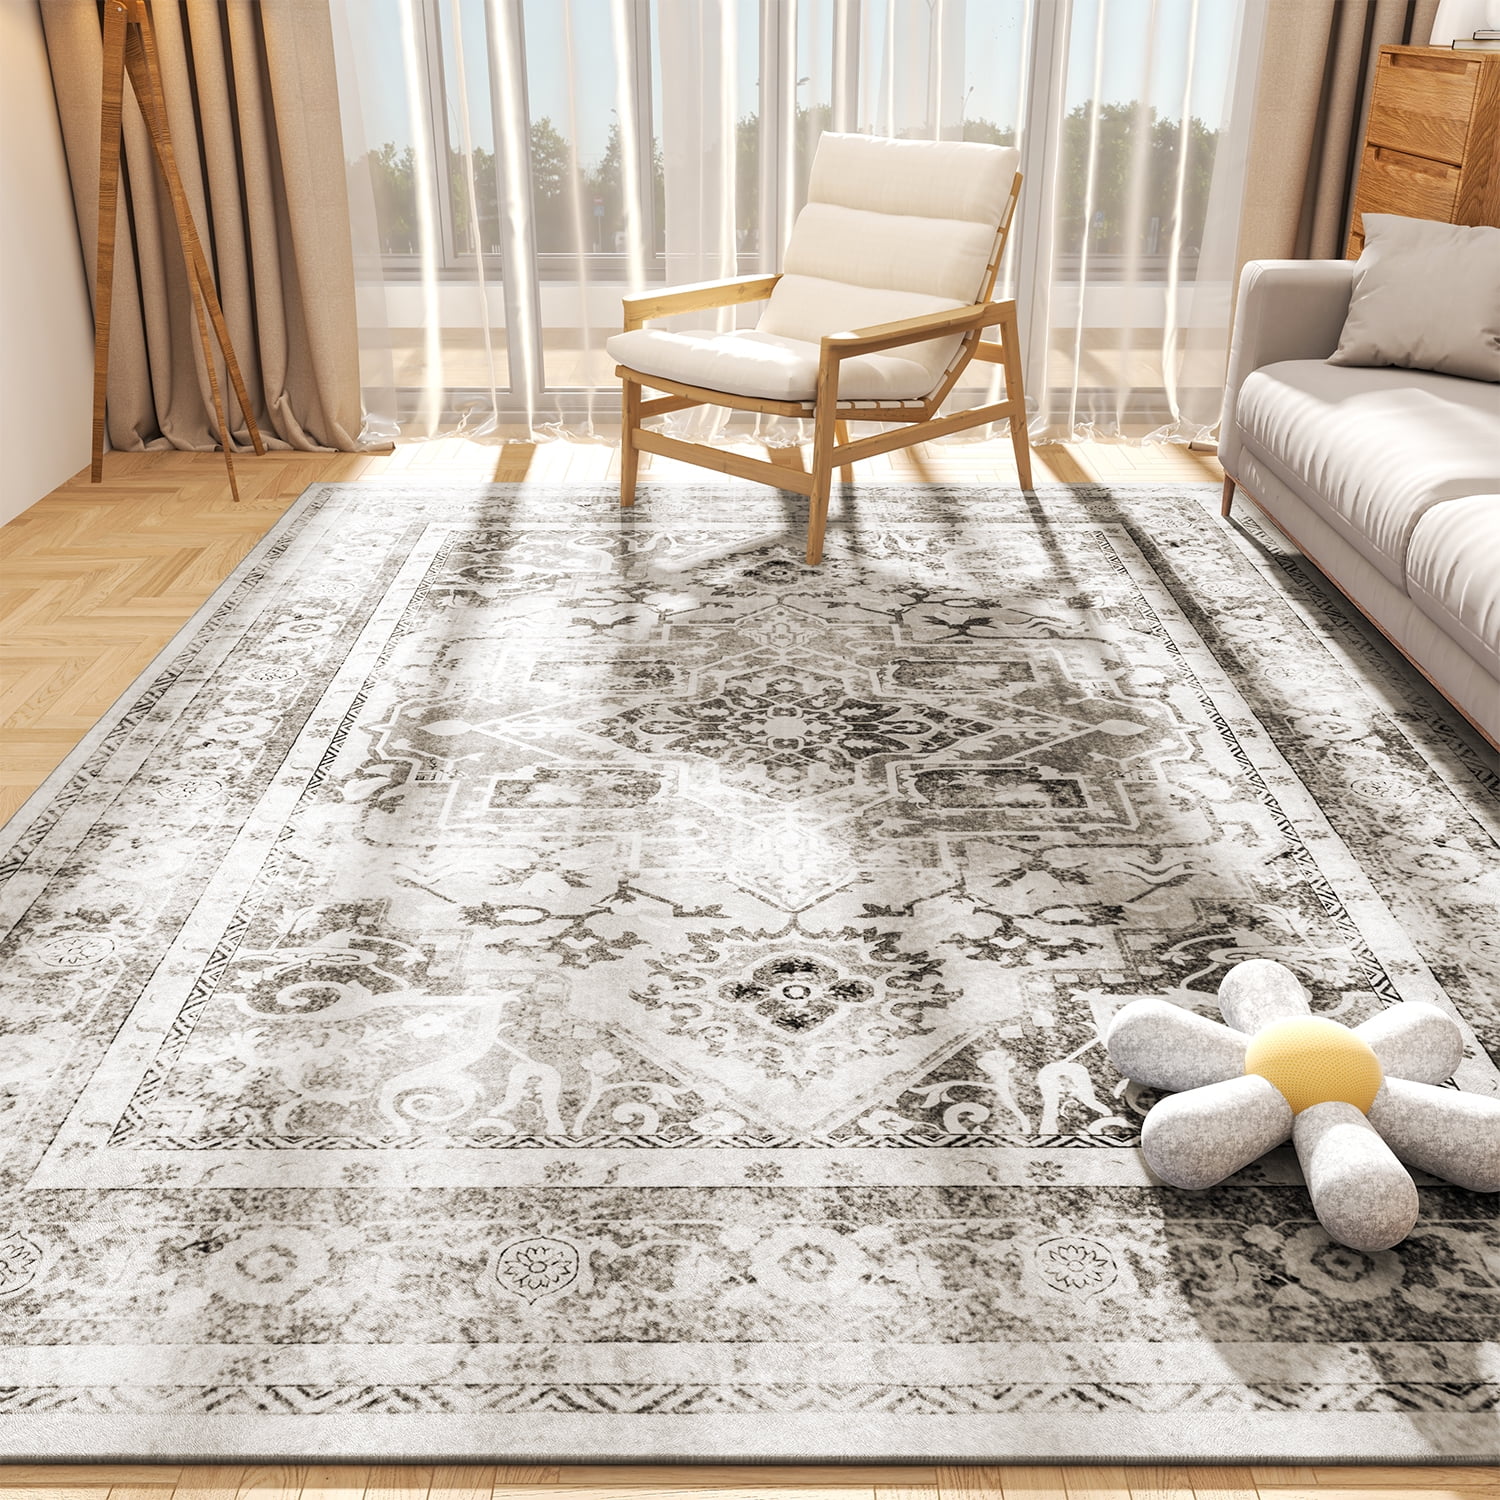 Area Rug Living Room Rugs - 5x7 Washable Large Soft Neutral Boho Moroccan  Bohemian Farmhouse Rug Indoor Floor Carpet for Bedroom Under Dining Table